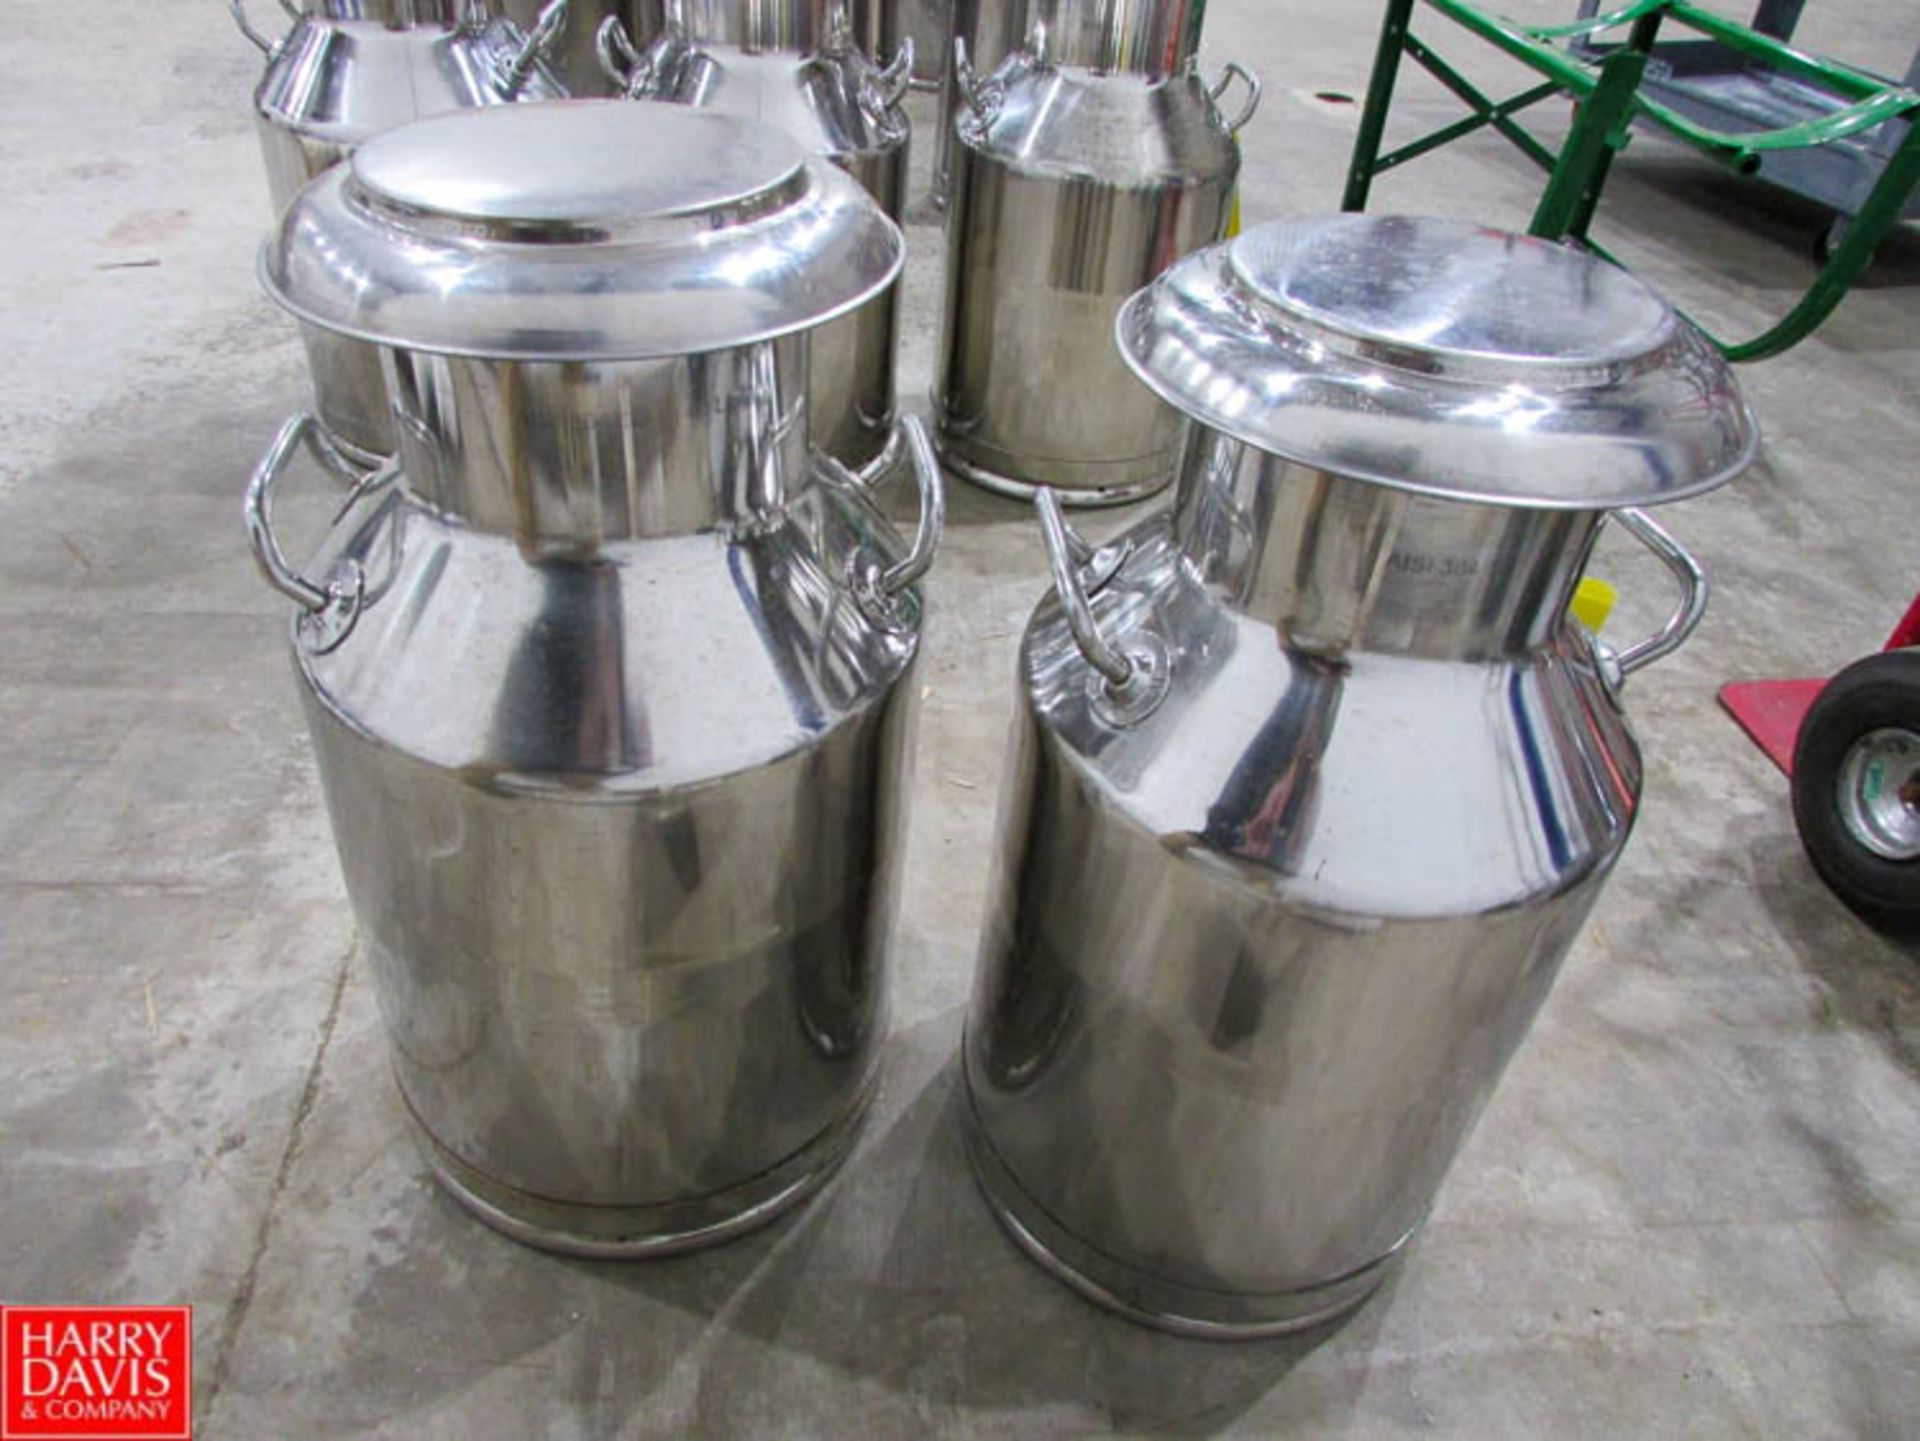 10 Gallon S/S Milk Cans with Lids Rigging Fee: $ 20 - Image 2 of 2